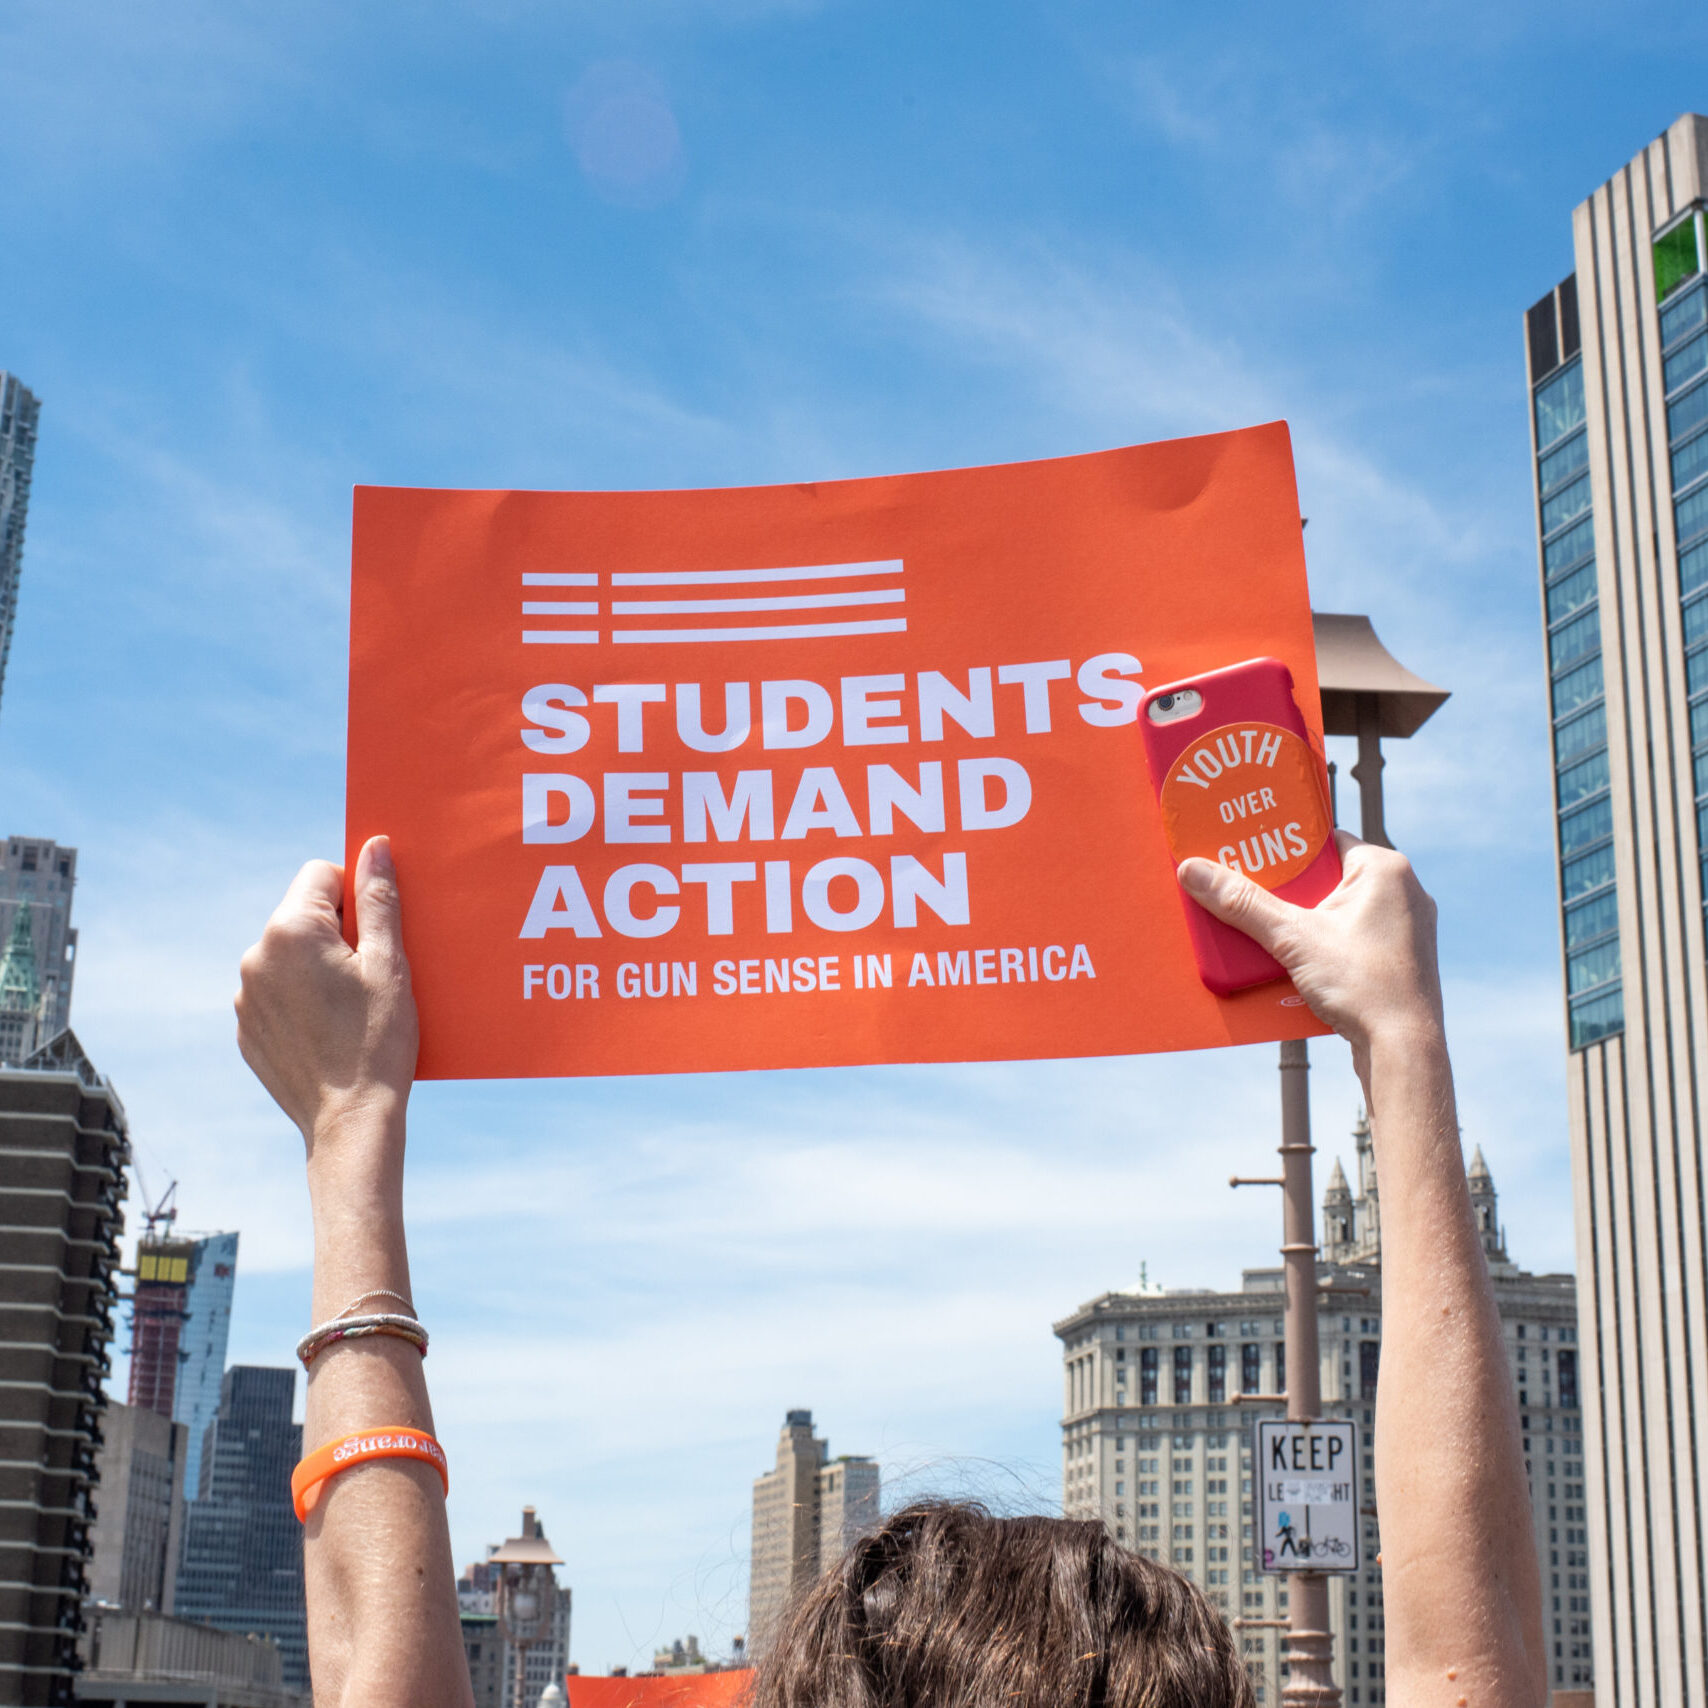 A person holds up an orange Students Demand Action sign